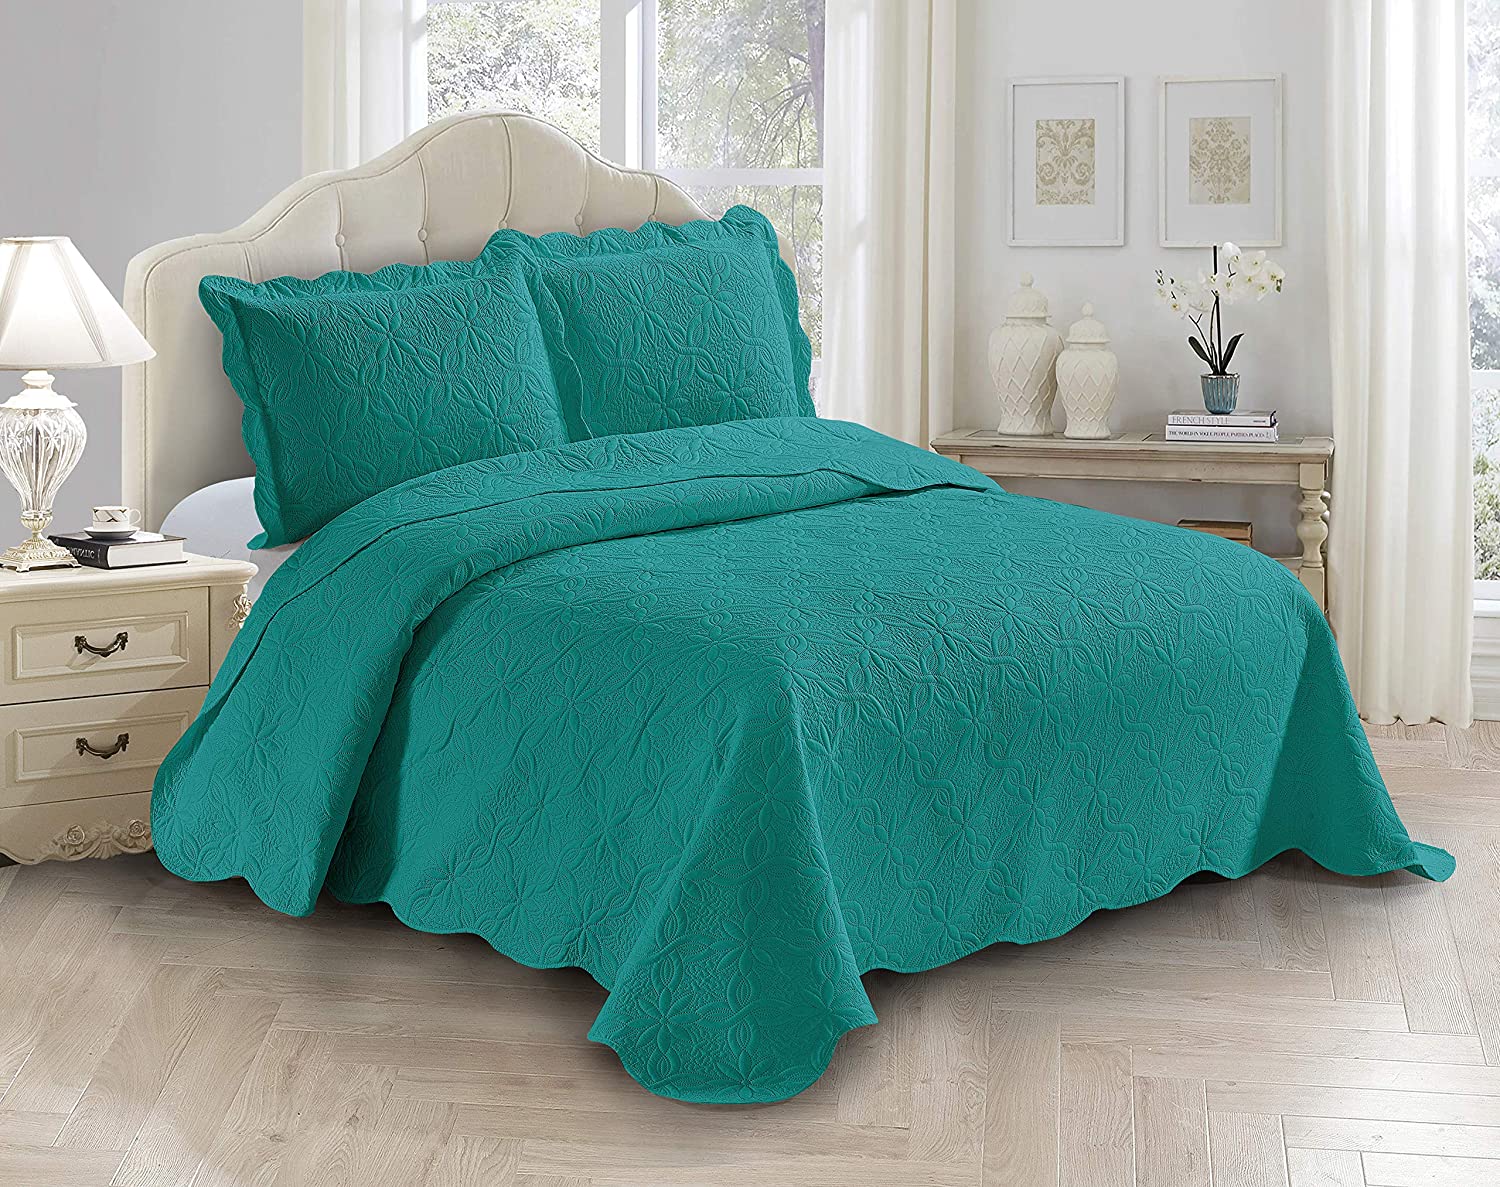 Fancy Linen Oversize Reversible Bedspread Floral Blue Teal Green All Sizes New 